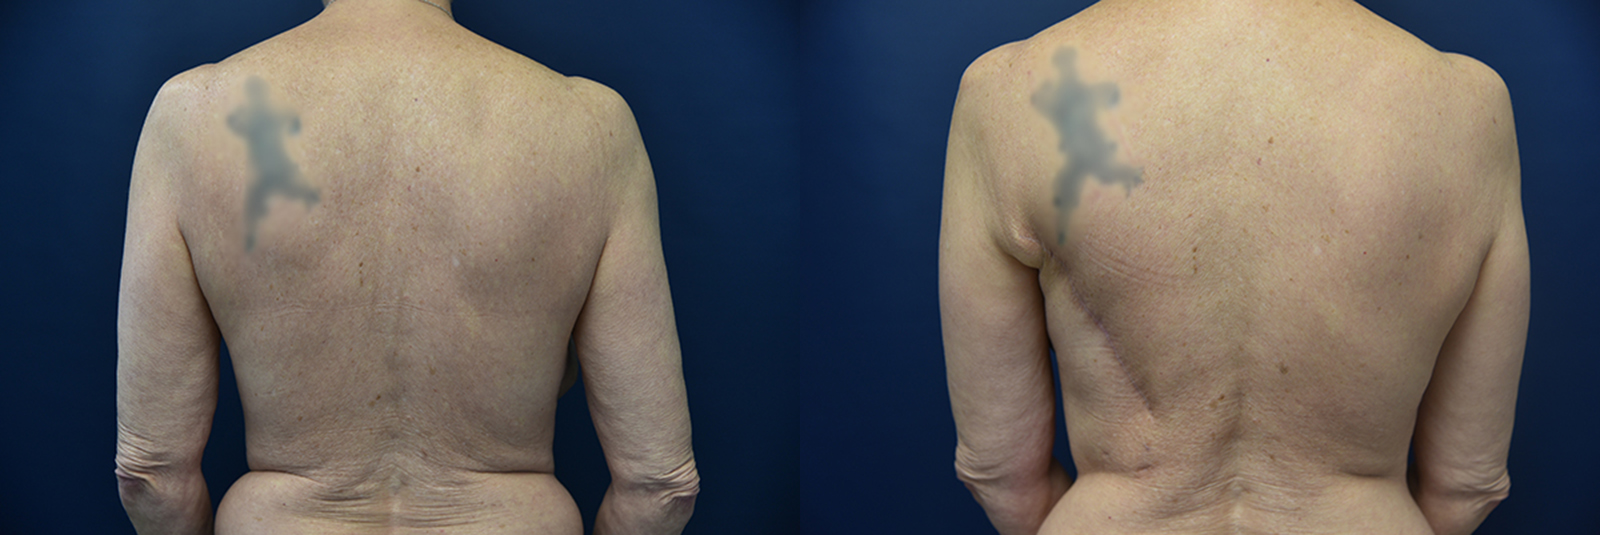 Latissimus Dorsi Before and After Photo by Dr. Leveque of Gulf Coast Plastic Surgery in Pensacola, FL